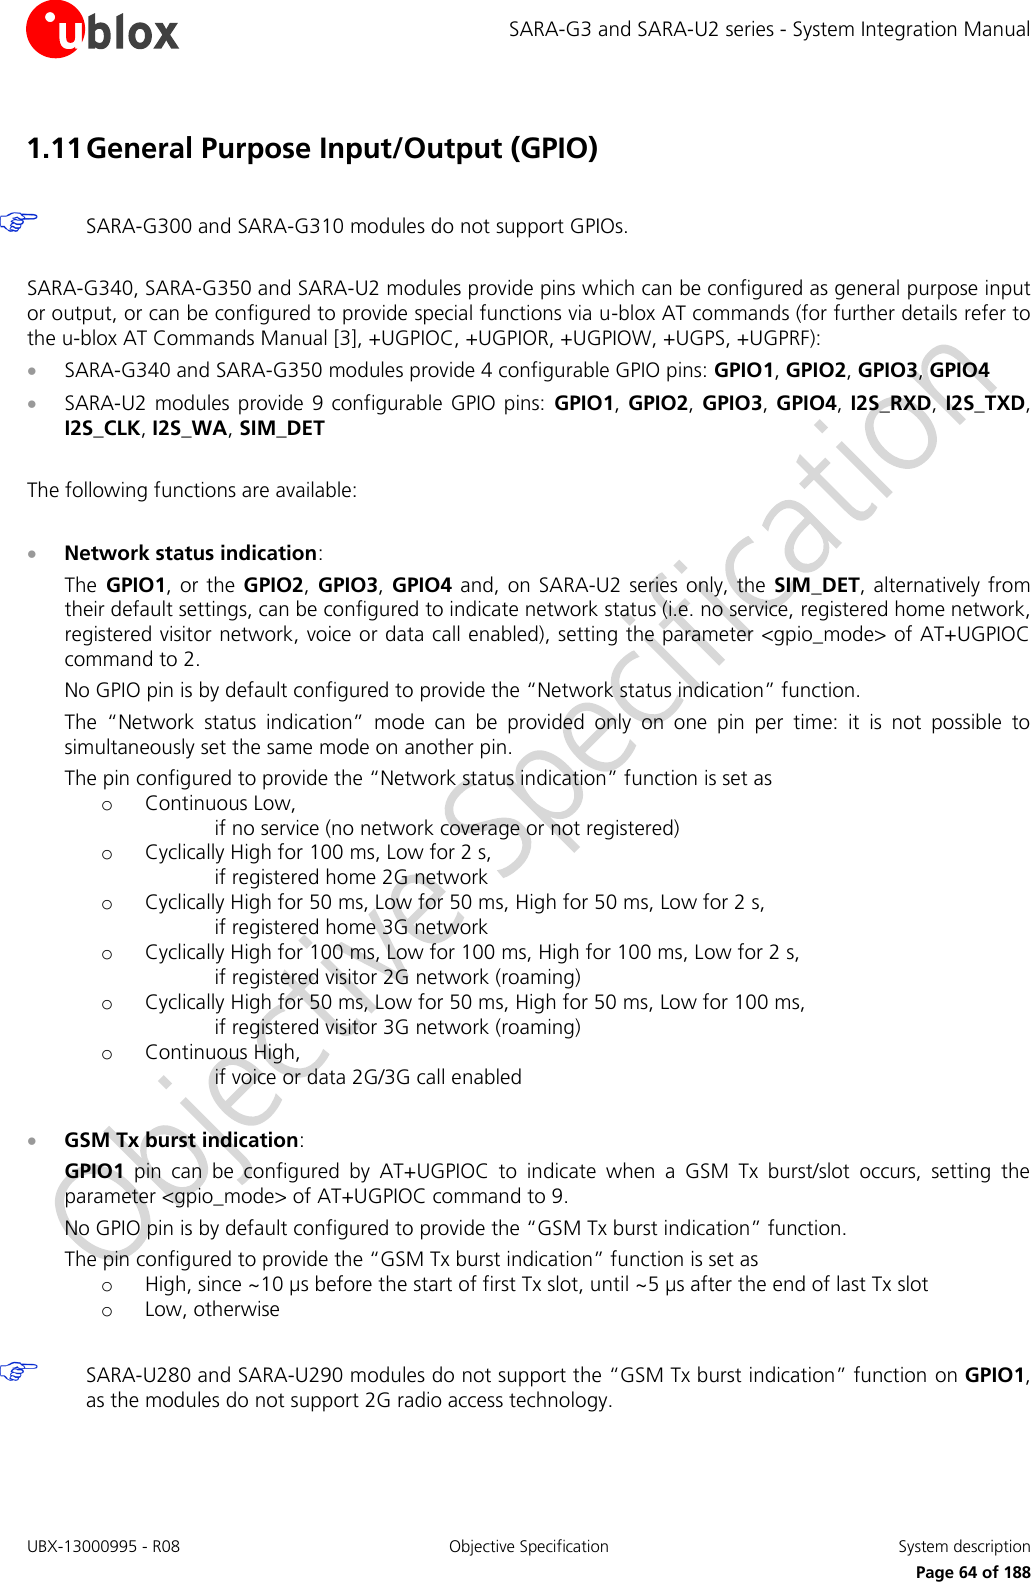 SARA-G3 and SARA-U2 series - System Integration Manual UBX-13000995 - R08  Objective Specification  System description     Page 64 of 188 1.11 General Purpose Input/Output (GPIO)   SARA-G300 and SARA-G310 modules do not support GPIOs.  SARA-G340, SARA-G350 and SARA-U2 modules provide pins which can be configured as general purpose input or output, or can be configured to provide special functions via u-blox AT commands (for further details refer to the u-blox AT Commands Manual [3], +UGPIOC, +UGPIOR, +UGPIOW, +UGPS, +UGPRF):  SARA-G340 and SARA-G350 modules provide 4 configurable GPIO pins: GPIO1, GPIO2, GPIO3, GPIO4  SARA-U2  modules provide 9  configurable GPIO  pins:  GPIO1,  GPIO2, GPIO3, GPIO4,  I2S_RXD,  I2S_TXD, I2S_CLK, I2S_WA, SIM_DET  The following functions are available:   Network status indication: The  GPIO1, or the  GPIO2, GPIO3,  GPIO4  and, on  SARA-U2  series only, the  SIM_DET,  alternatively from their default settings, can be configured to indicate network status (i.e. no service, registered home network, registered visitor network, voice or data call enabled), setting the parameter &lt;gpio_mode&gt; of AT+UGPIOC command to 2. No GPIO pin is by default configured to provide the “Network status indication” function. The  “Network  status  indication”  mode  can  be  provided  only  on  one  pin  per  time:  it  is  not  possible  to simultaneously set the same mode on another pin. The pin configured to provide the “Network status indication” function is set as o Continuous Low, if no service (no network coverage or not registered) o Cyclically High for 100 ms, Low for 2 s, if registered home 2G network o Cyclically High for 50 ms, Low for 50 ms, High for 50 ms, Low for 2 s, if registered home 3G network o Cyclically High for 100 ms, Low for 100 ms, High for 100 ms, Low for 2 s, if registered visitor 2G network (roaming) o Cyclically High for 50 ms, Low for 50 ms, High for 50 ms, Low for 100 ms, if registered visitor 3G network (roaming) o Continuous High, if voice or data 2G/3G call enabled   GSM Tx burst indication: GPIO1  pin  can  be  configured  by  AT+UGPIOC  to  indicate  when  a  GSM  Tx  burst/slot  occurs,  setting  the parameter &lt;gpio_mode&gt; of AT+UGPIOC command to 9. No GPIO pin is by default configured to provide the “GSM Tx burst indication” function. The pin configured to provide the “GSM Tx burst indication” function is set as o High, since ~10 µs before the start of first Tx slot, until ~5 µs after the end of last Tx slot o Low, otherwise   SARA-U280 and SARA-U290 modules do not support the “GSM Tx burst indication” function on GPIO1, as the modules do not support 2G radio access technology.  